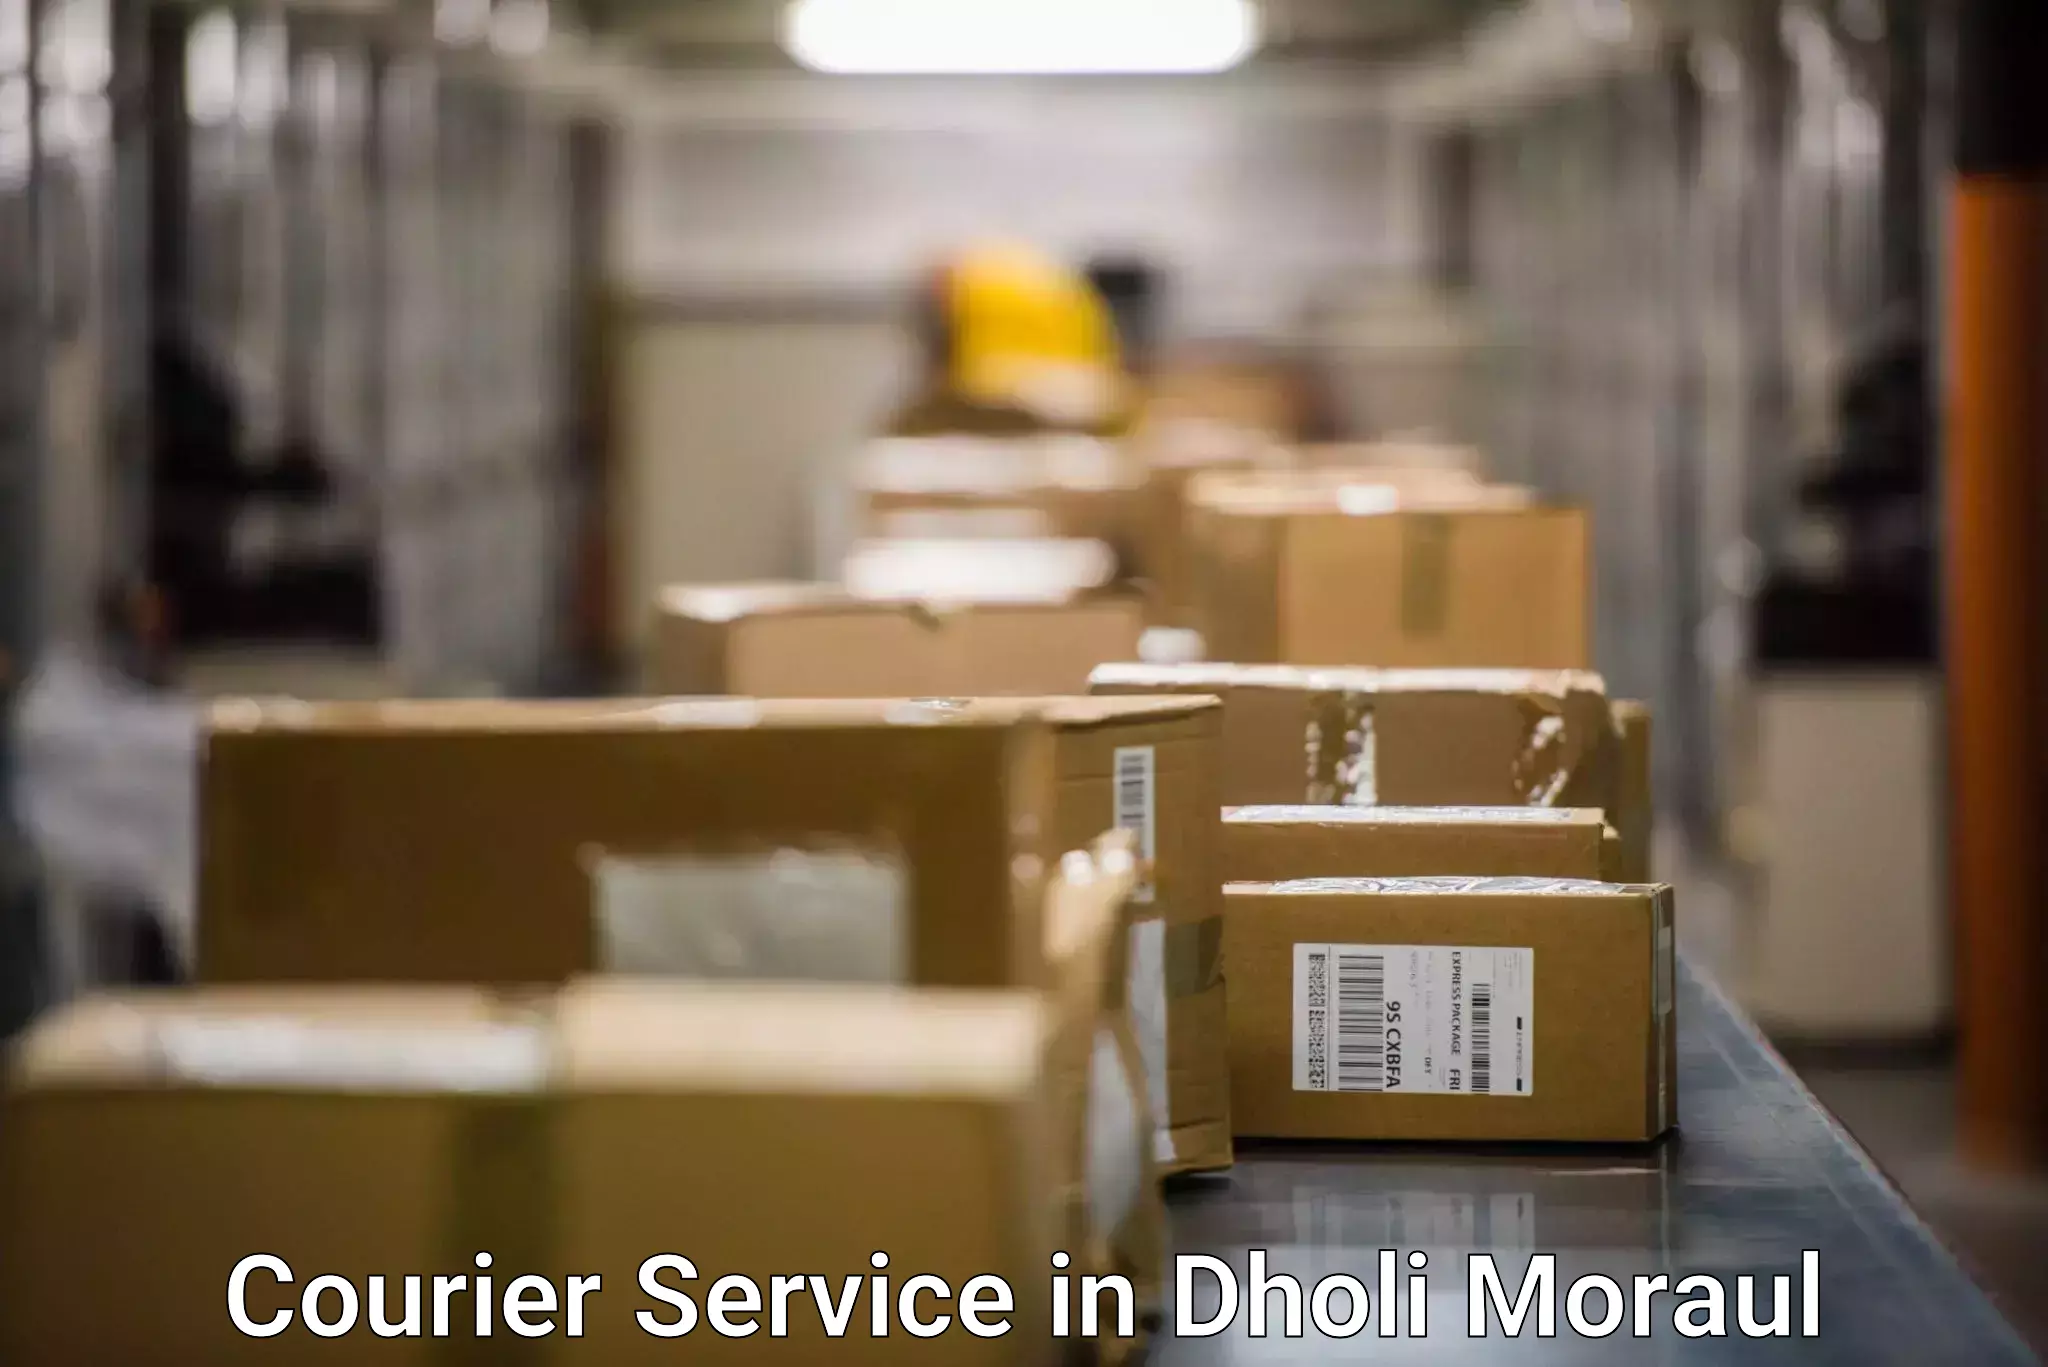 Scalable shipping solutions in Dholi Moraul